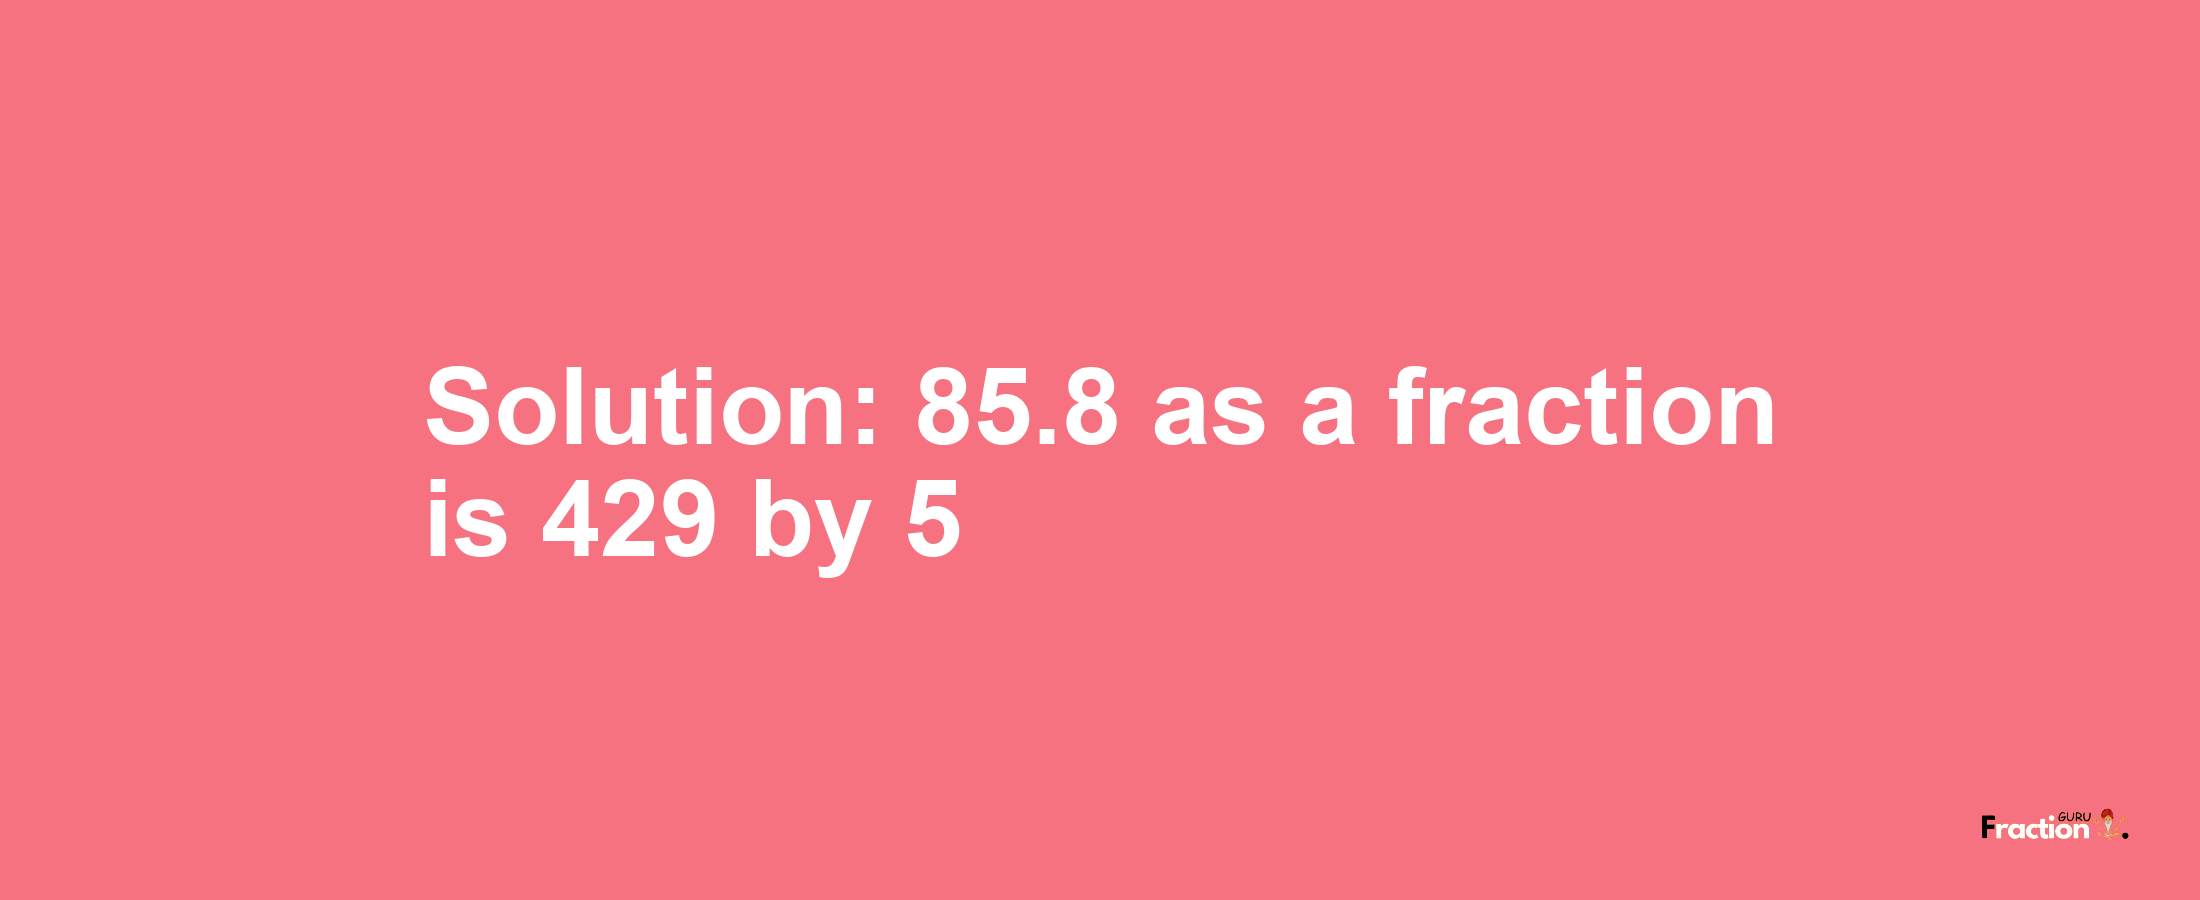 Solution:85.8 as a fraction is 429/5